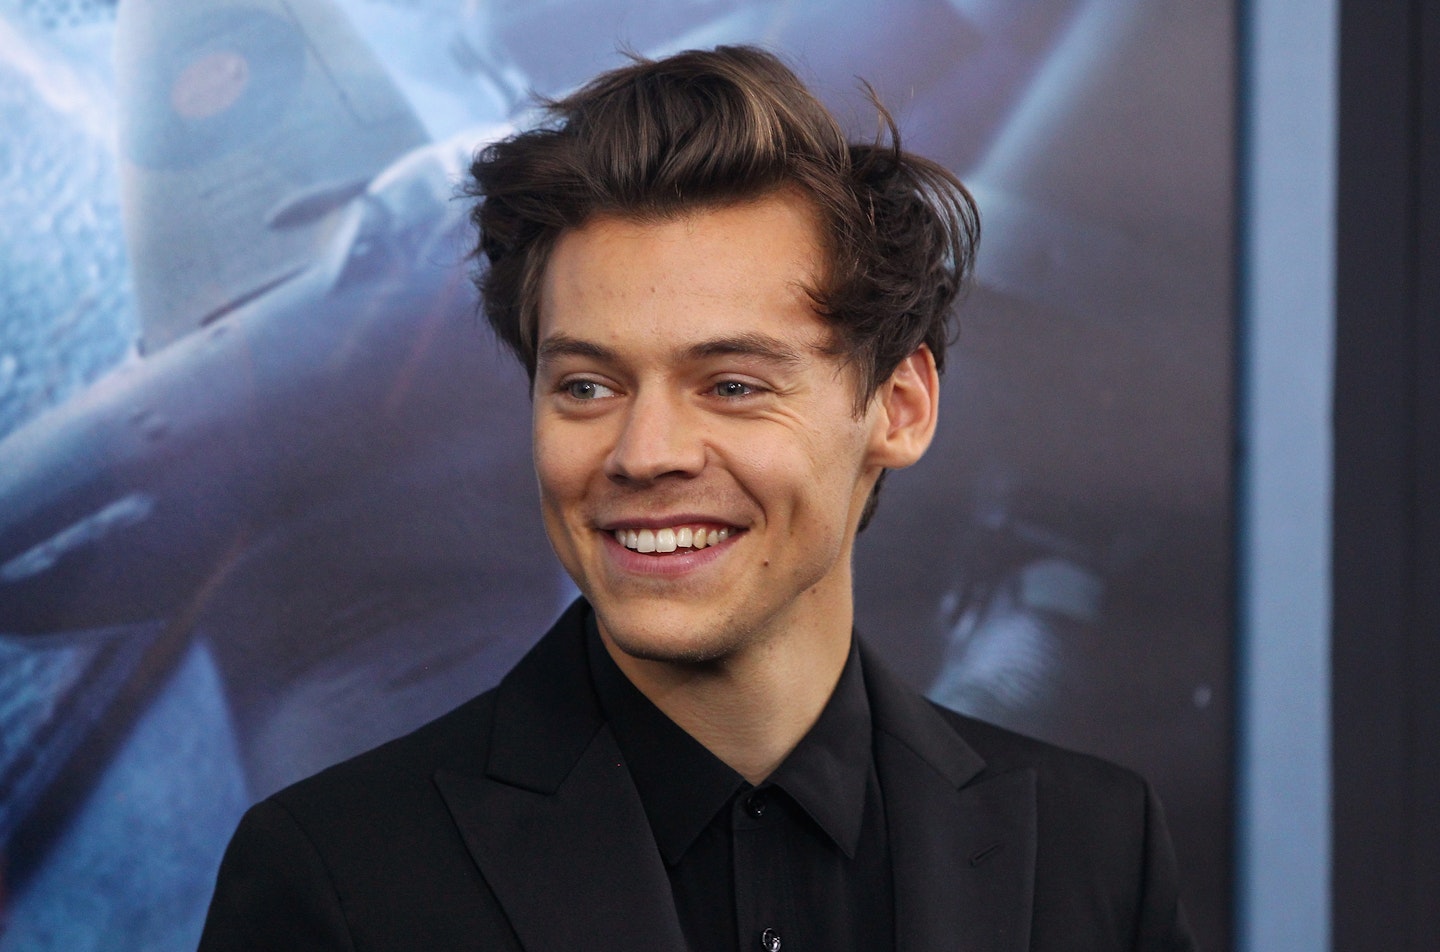 Harry Styles surprises fans with new haircut